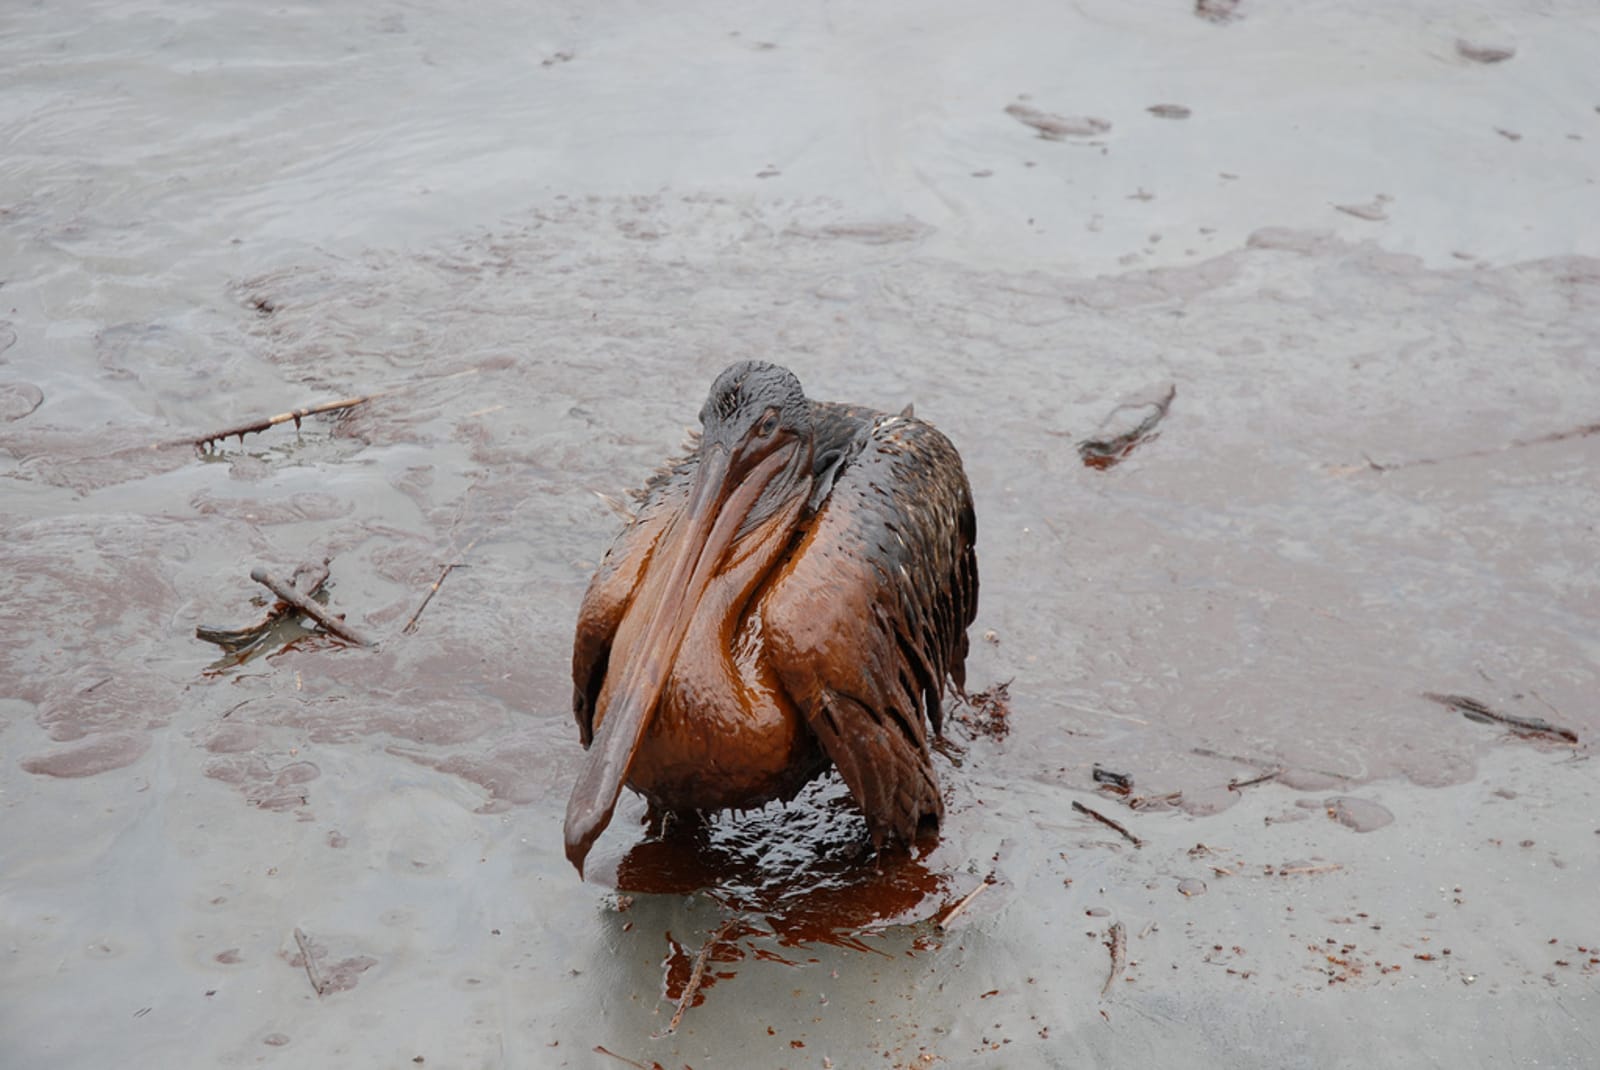 How the Deepwell Horizon Spill is Still Impacting the Gulf Ecosystem